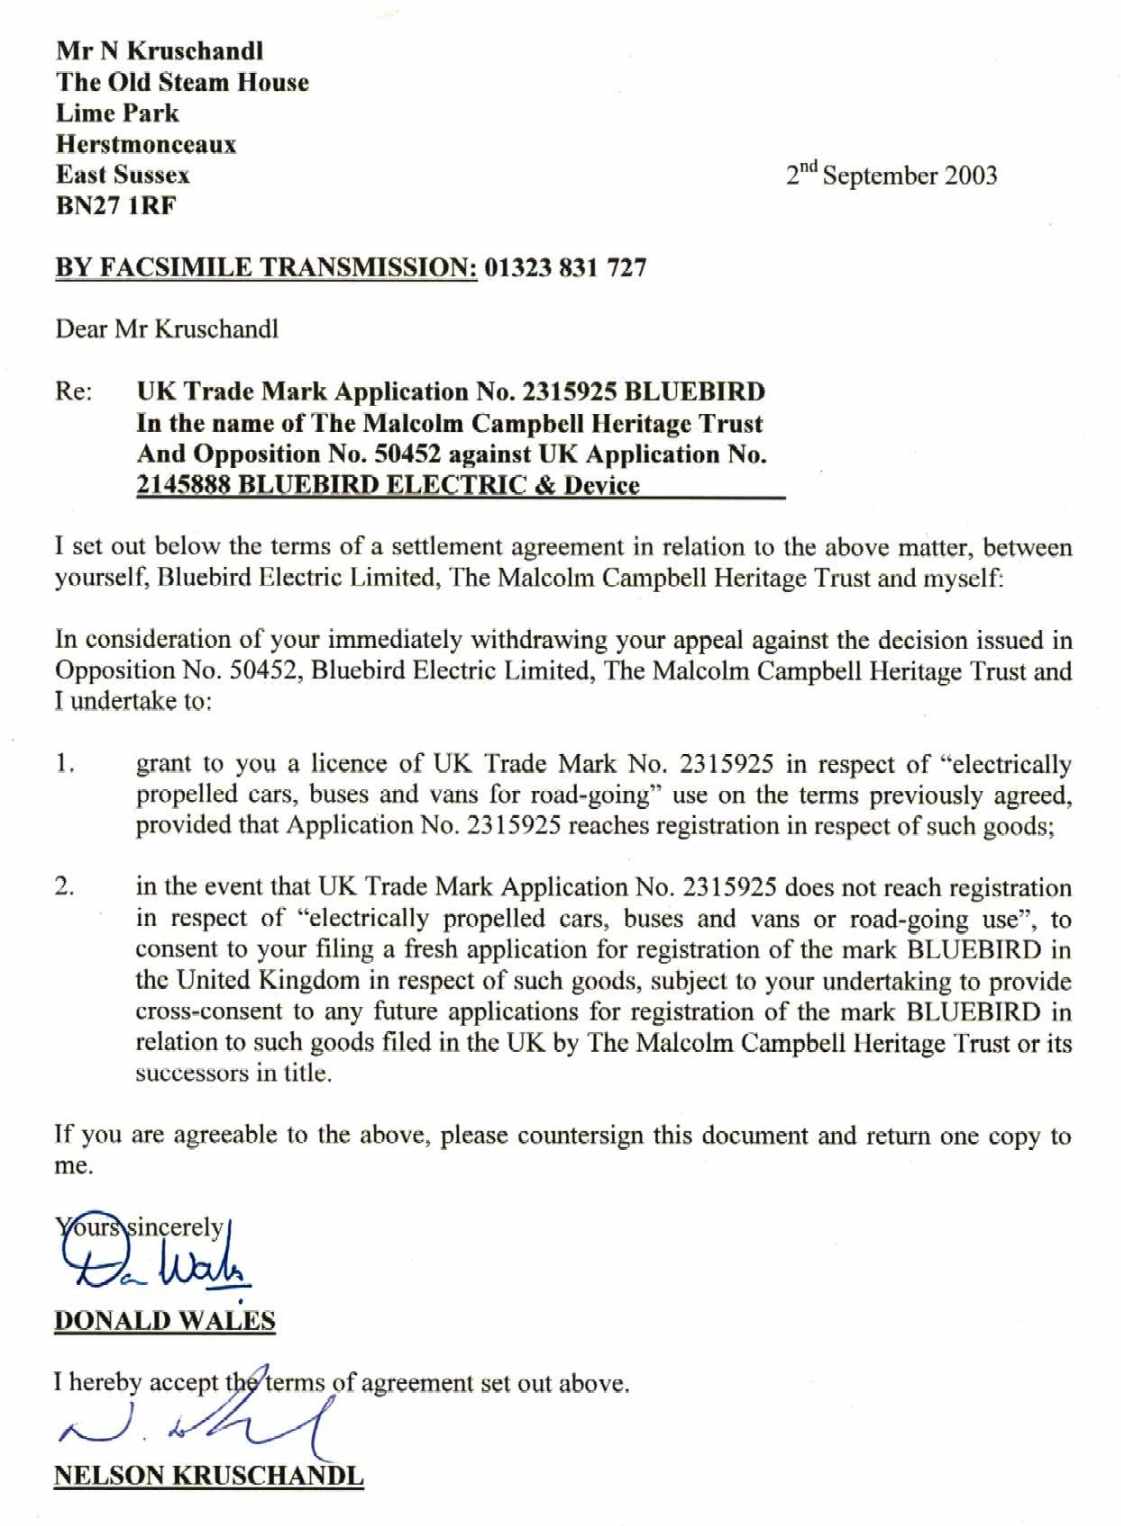 Undertaking from the Malcolm Campbell Heritage Trust to Nelson Kruschandl, confirming issue of a Licence for withdrawing Appeal to opposition 50452